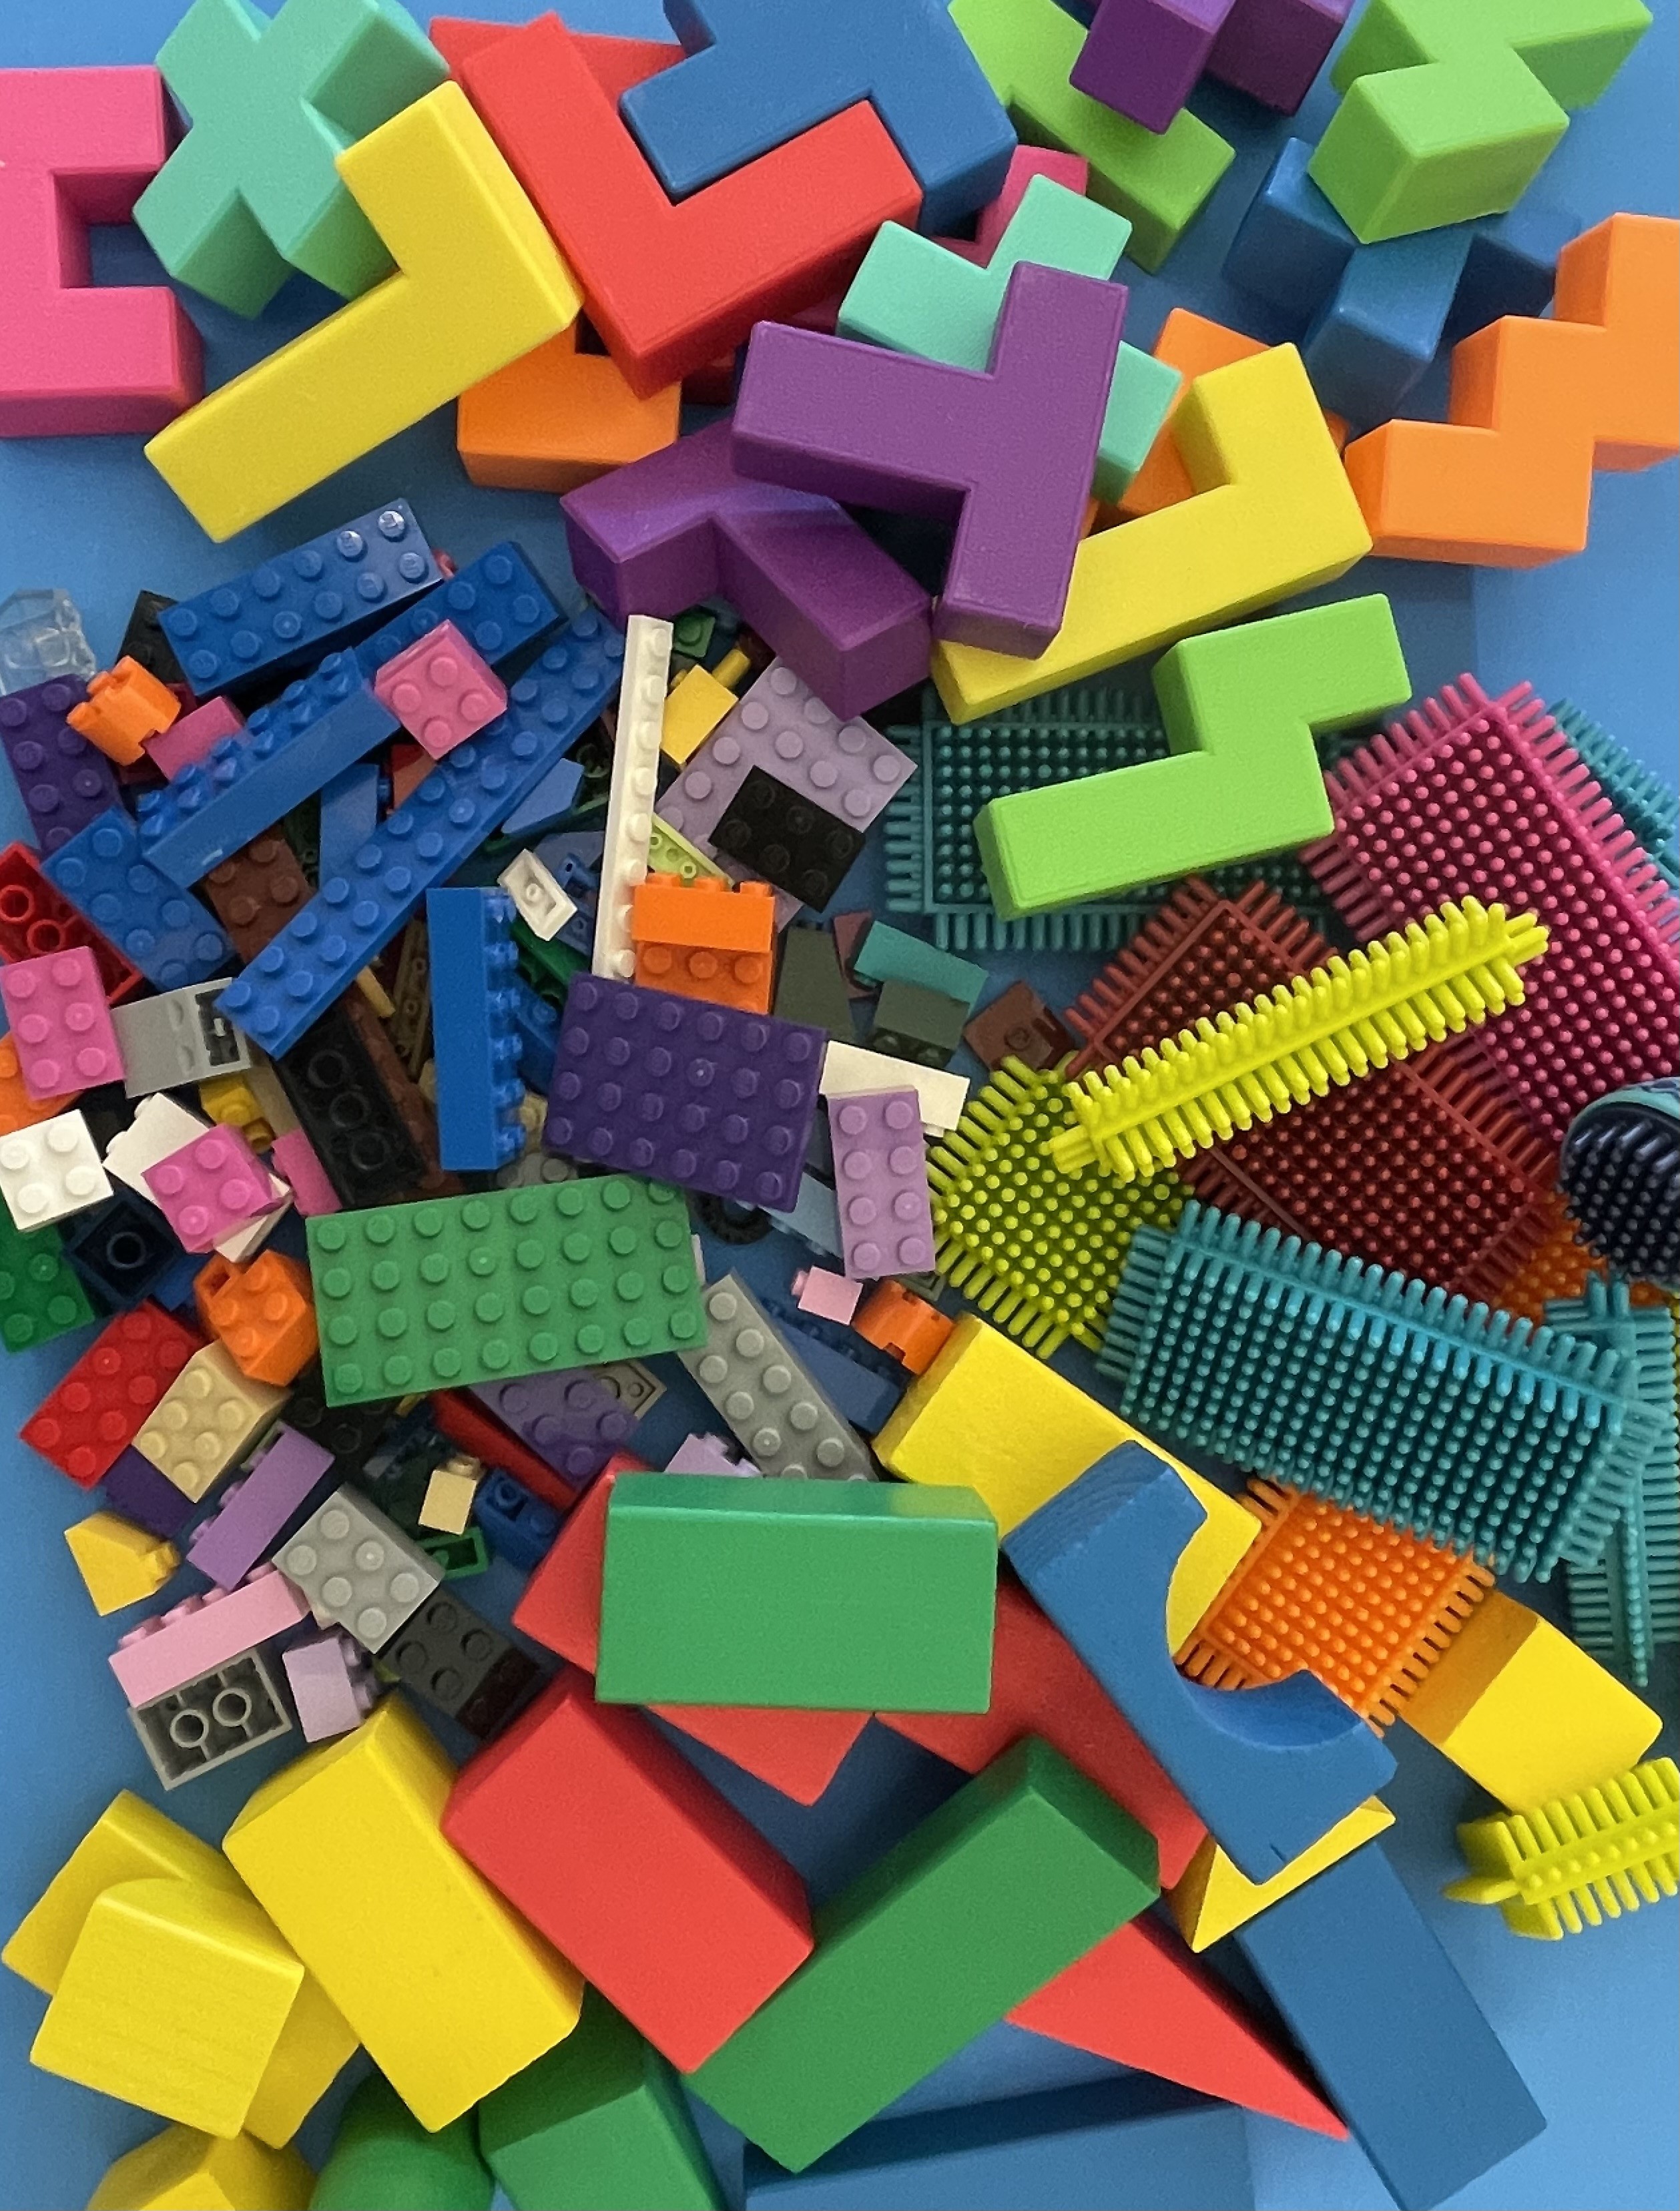 picture of various kinds of blocks